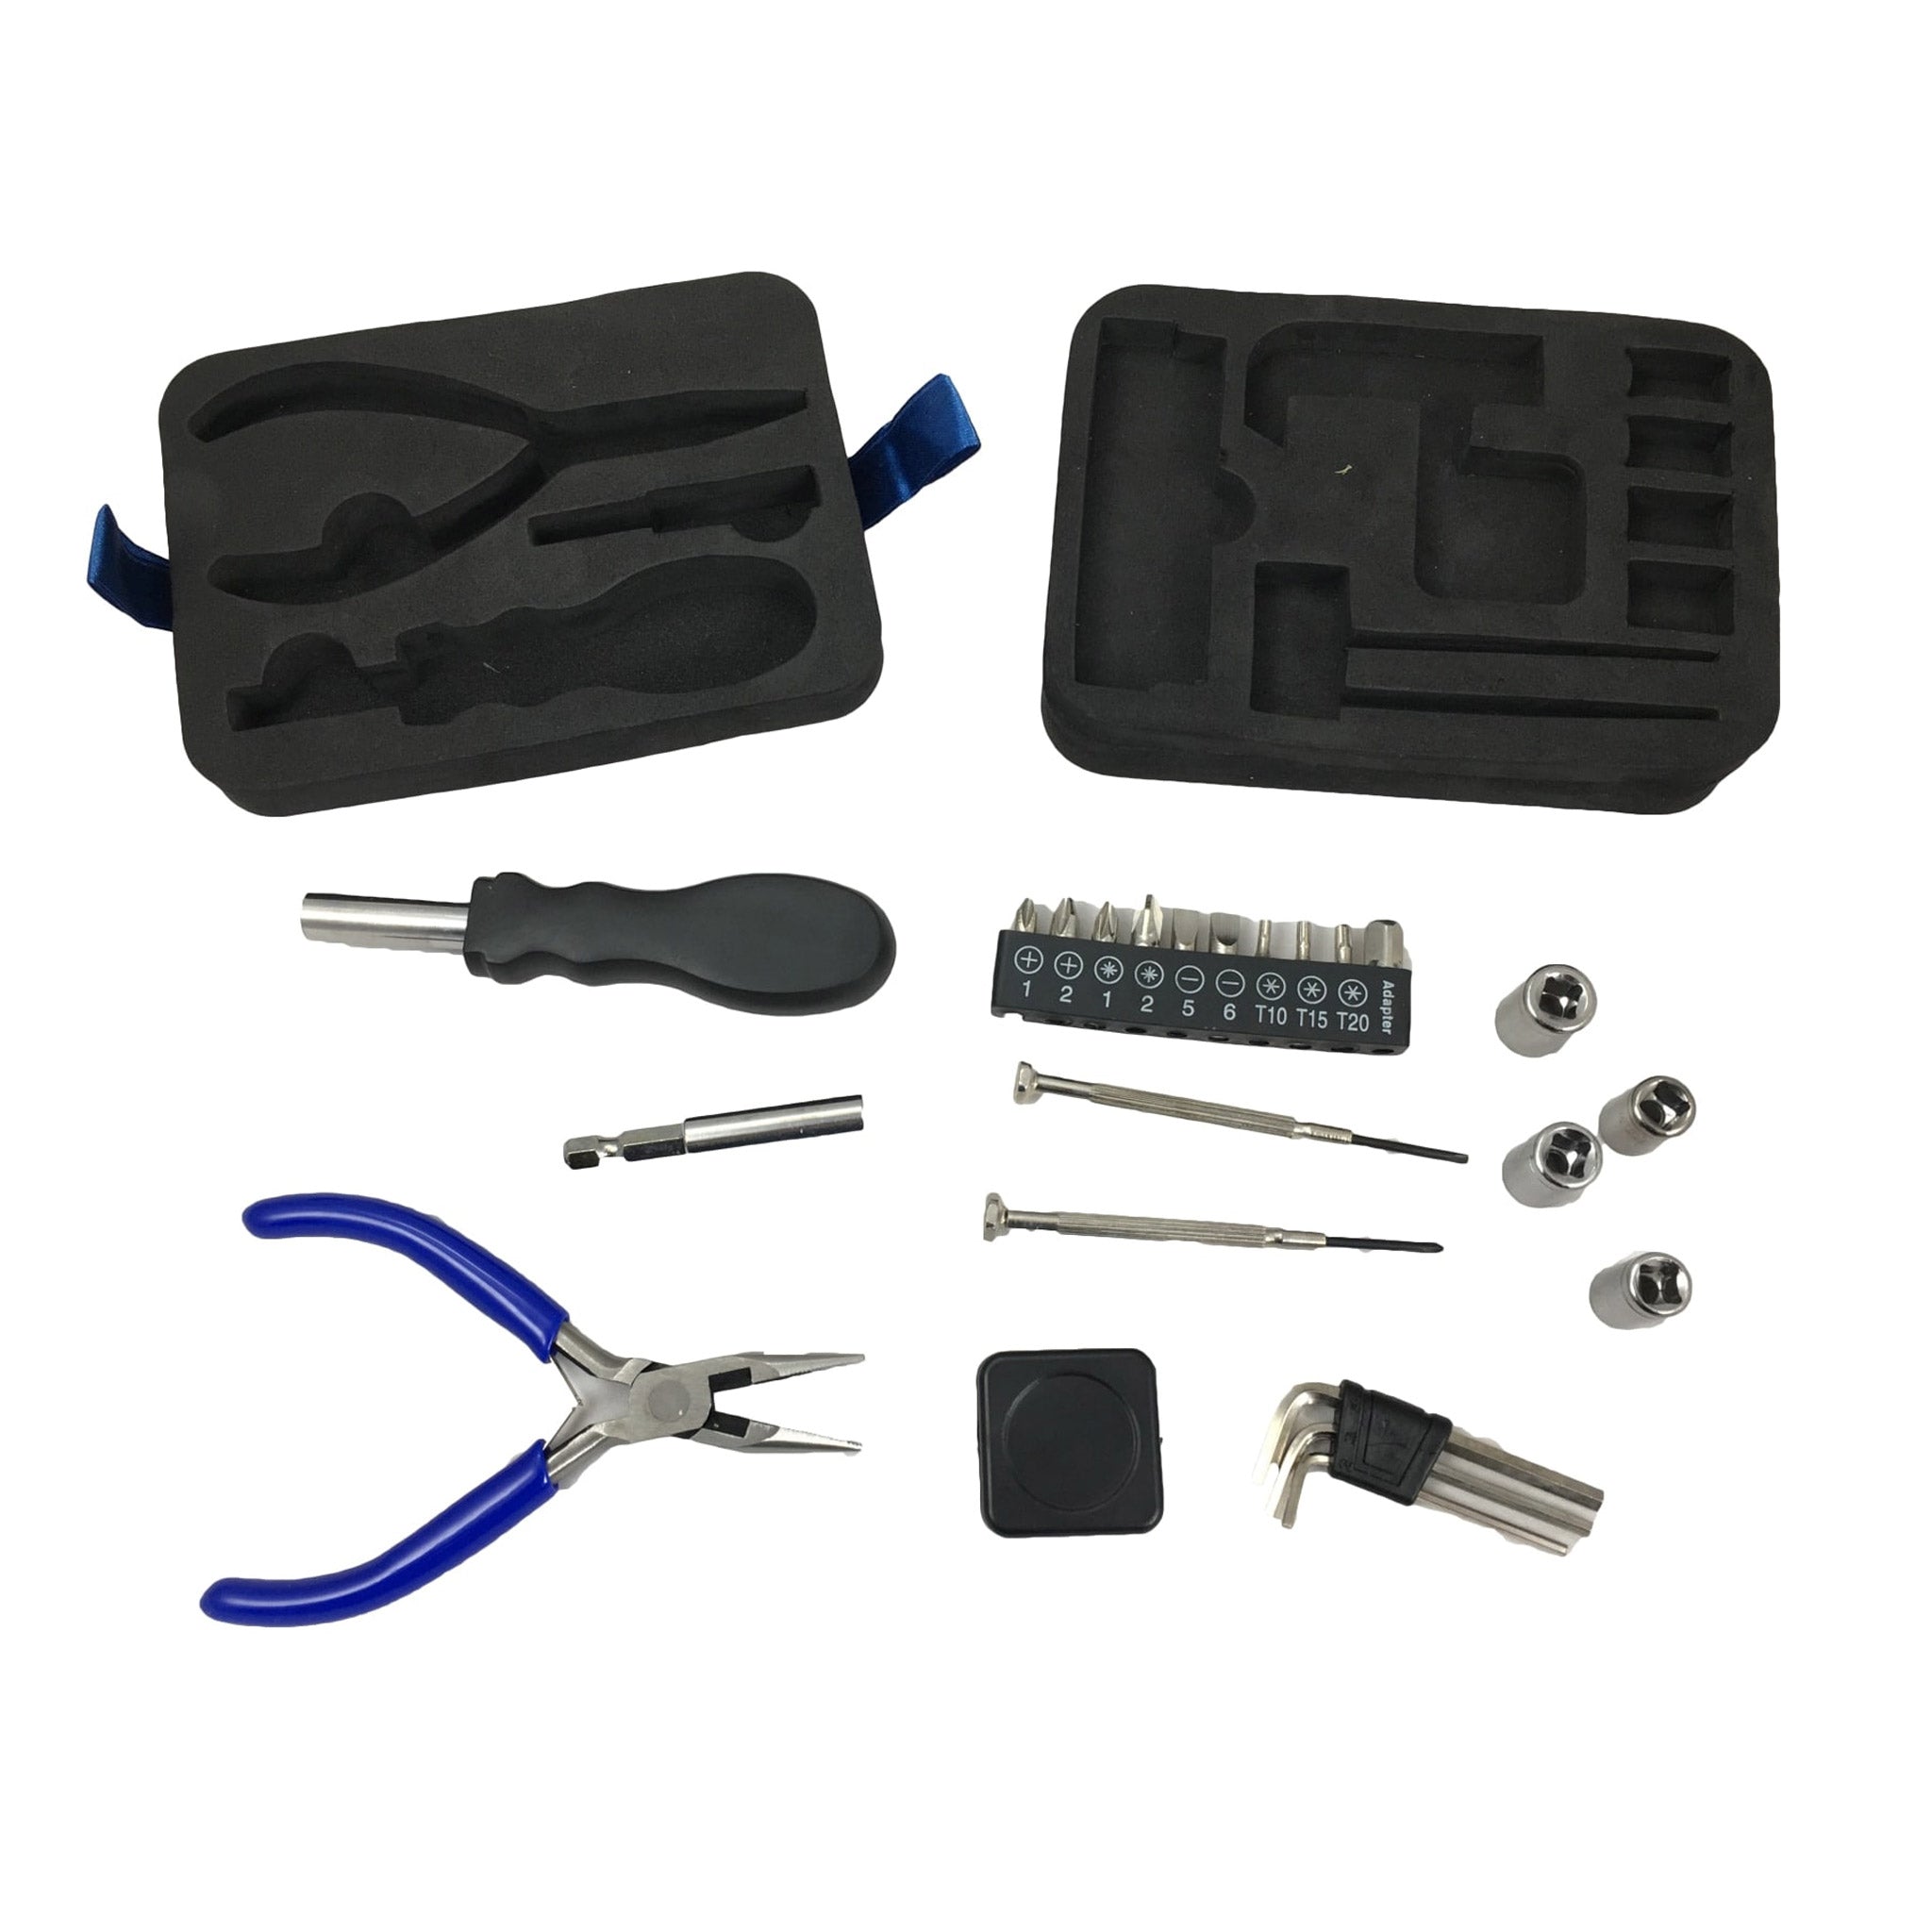 The contents of the tool set are displayed on a white background. An interchangeable screwdriver with extension, two jewellers screwdrivers, a tape measure, Allen keys and a pair of pliers.